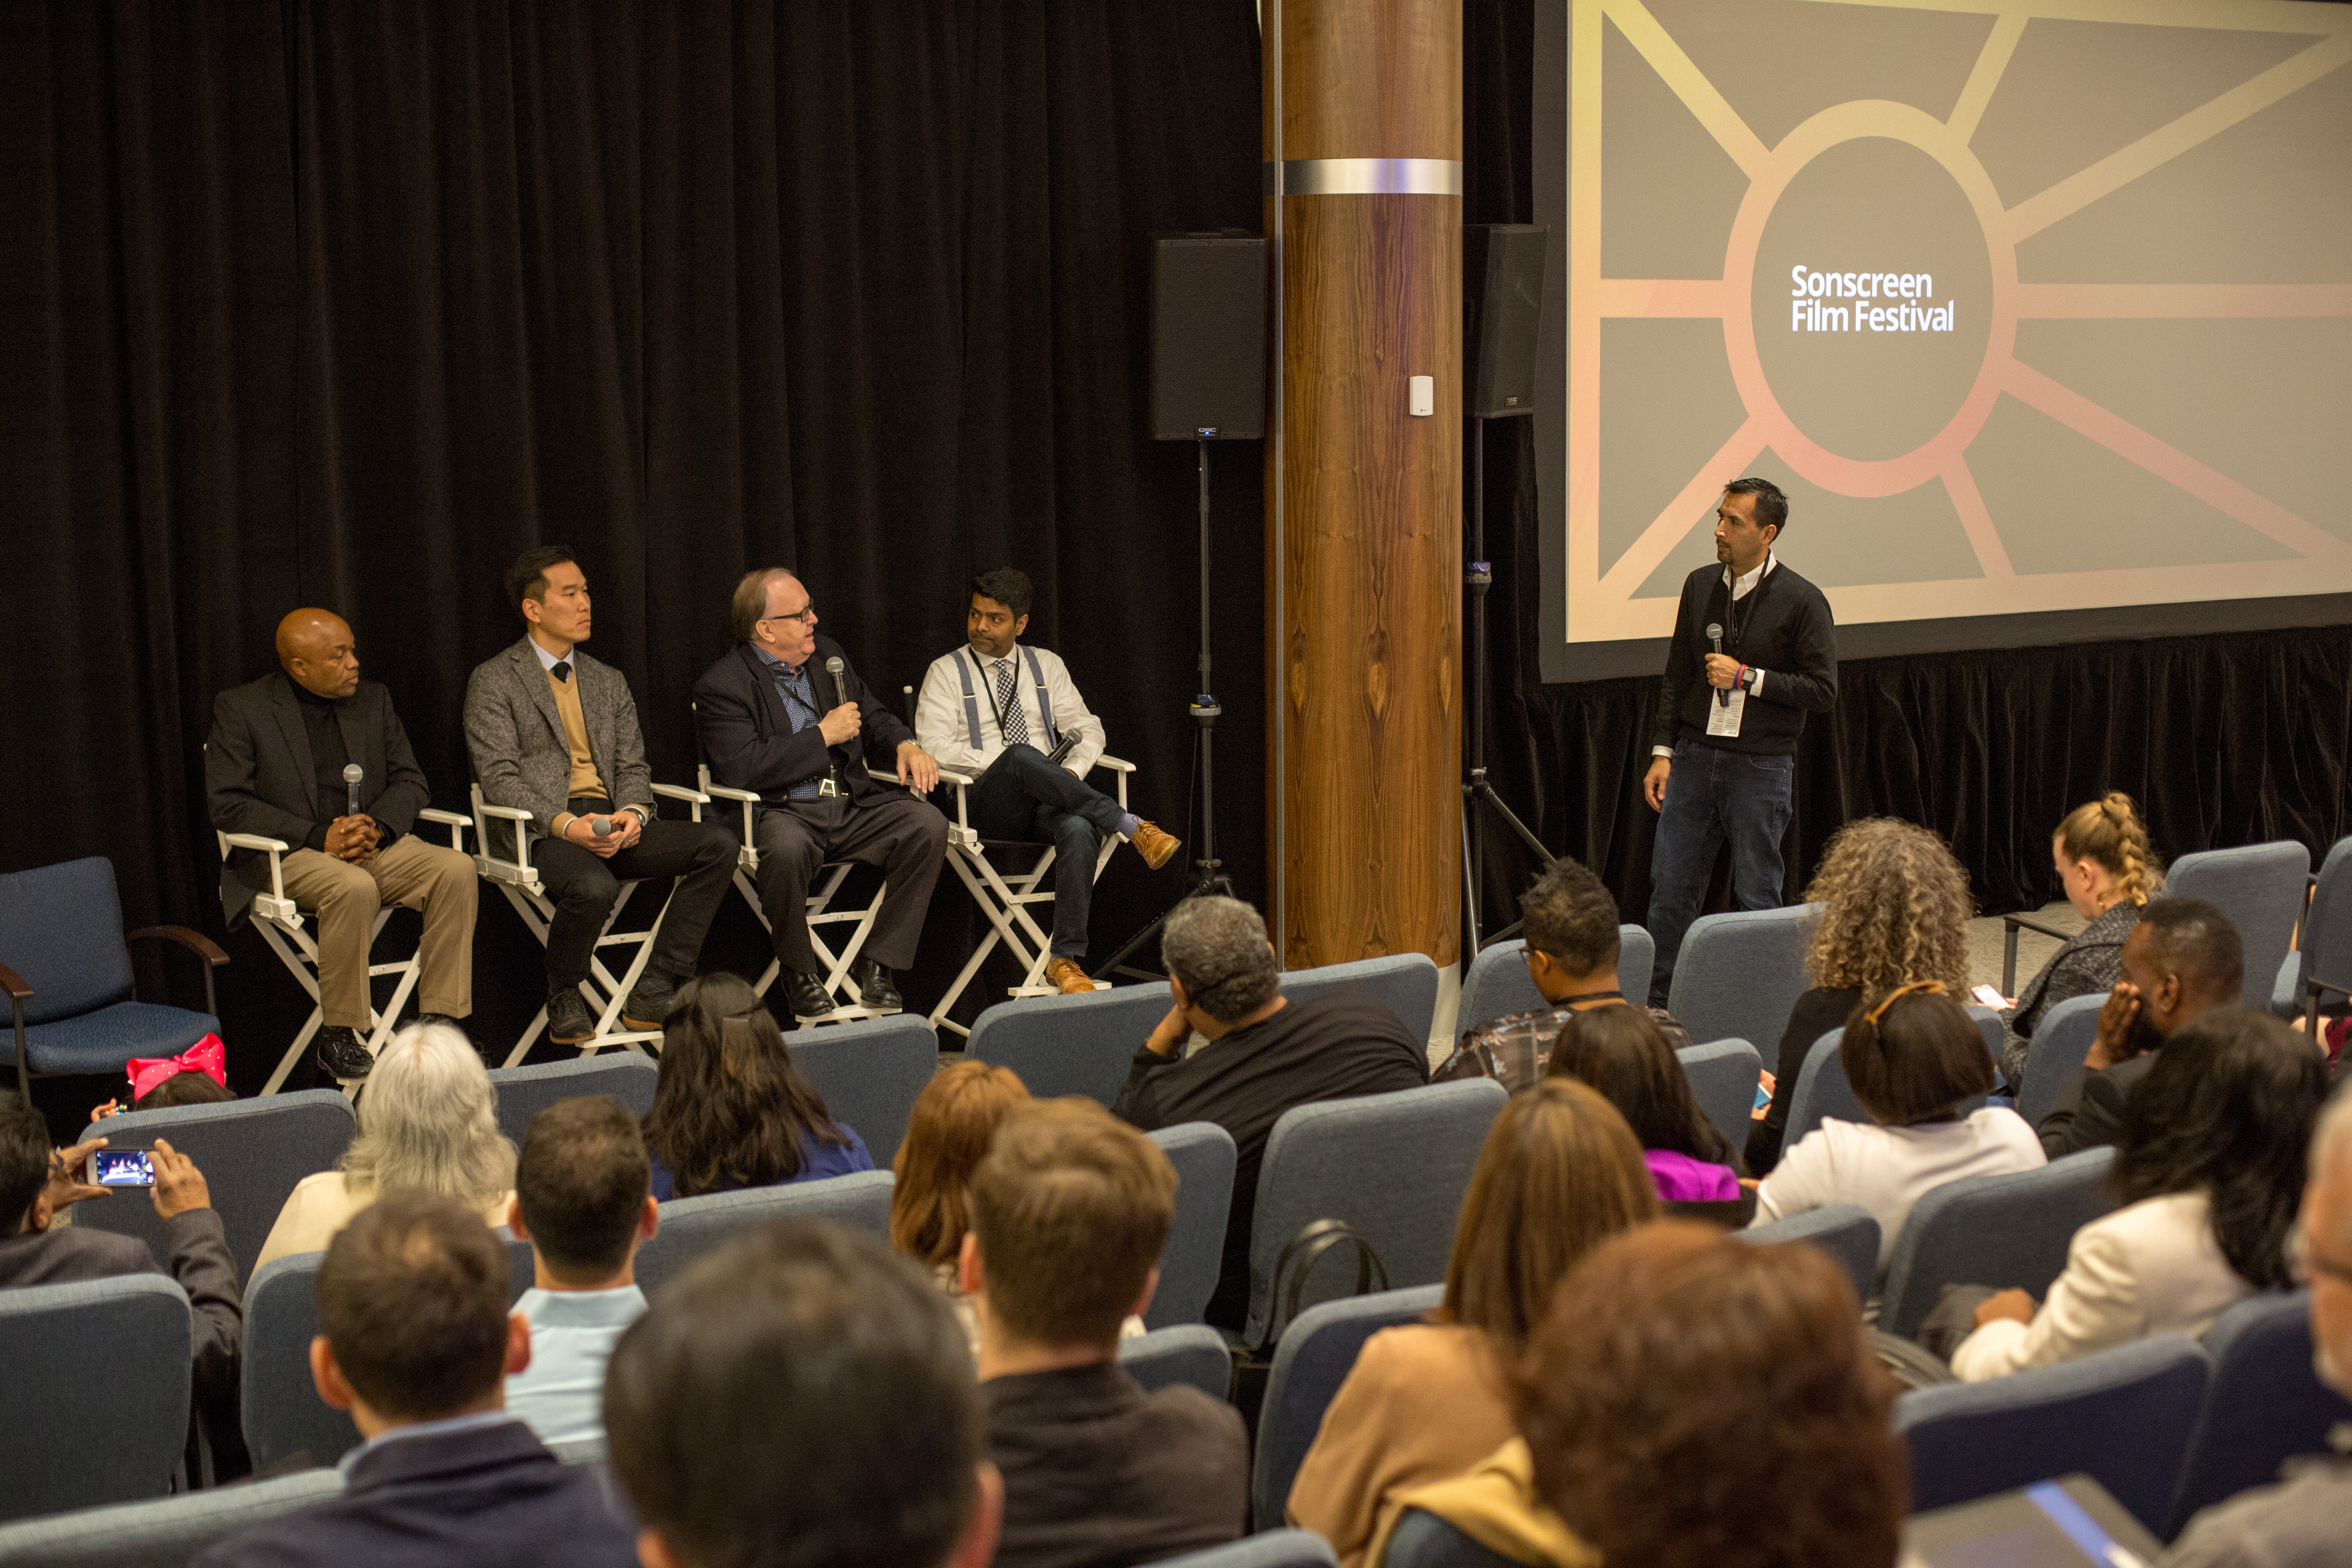 A panel of church leaders and film professors discuss the role of film in addressing social issues that challenge society and the church during the 2018 Sonscreen Film Festival. Photo by Pieter Damsteegt